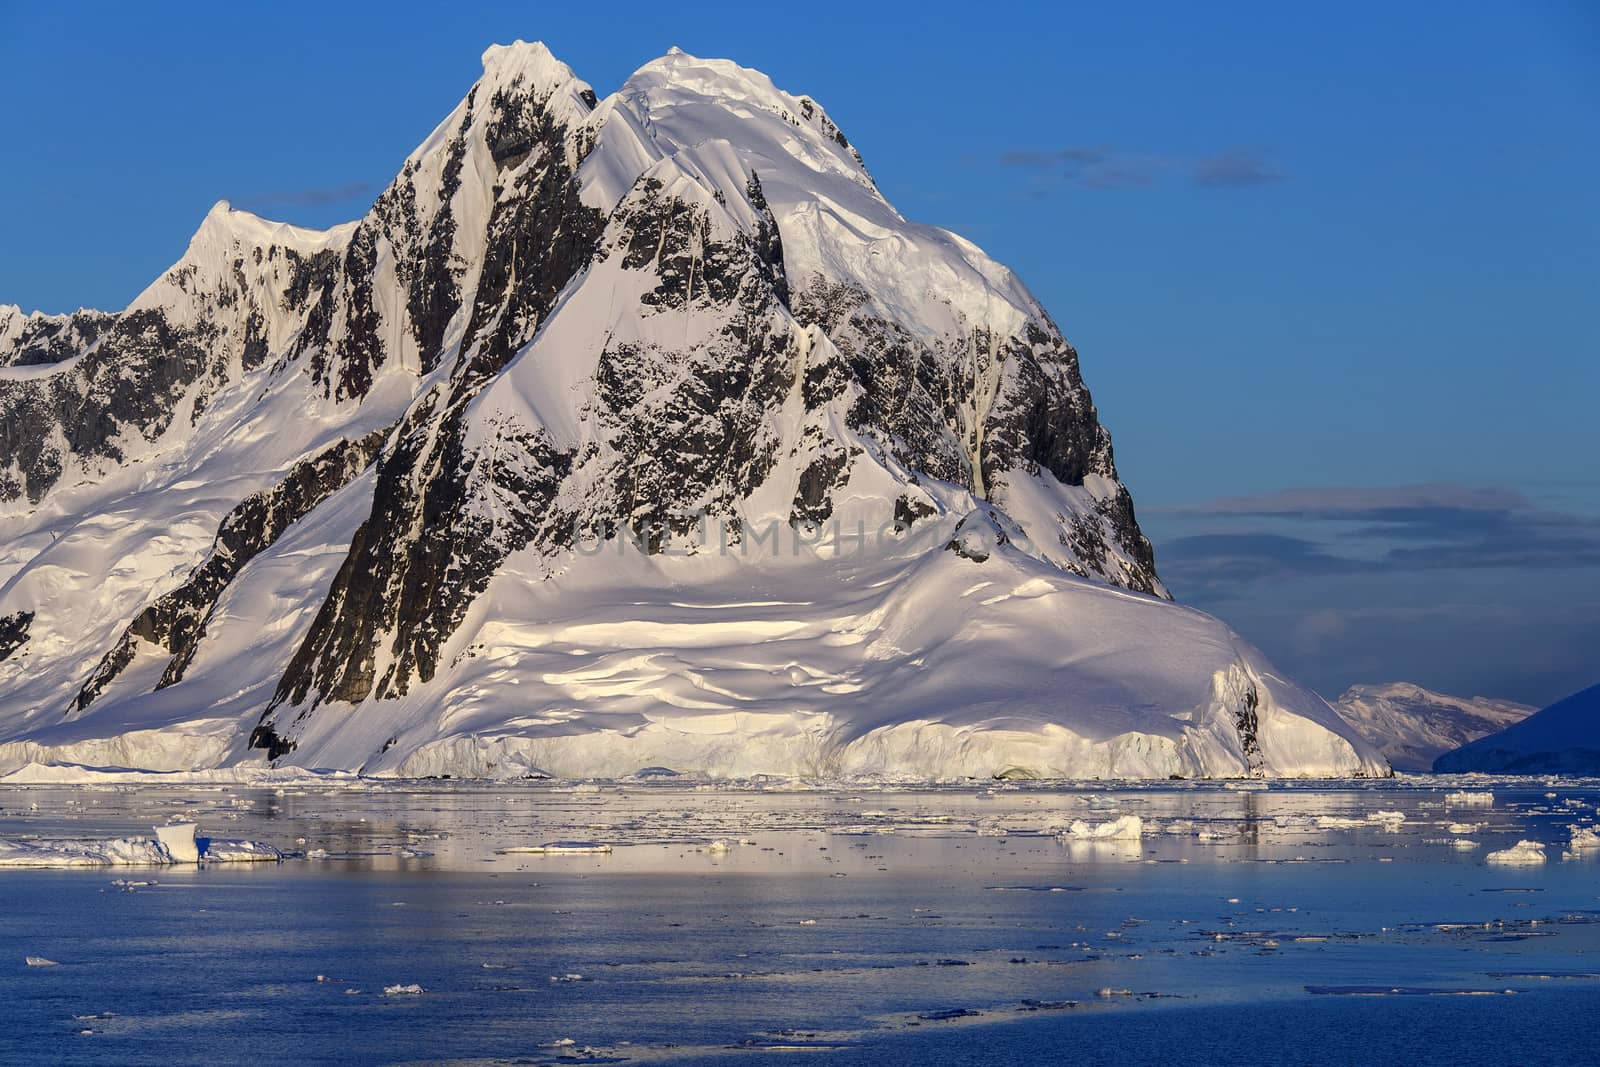 Scenery in the Lemaire Channel on the Antarctic Peninsula in Antarctica.